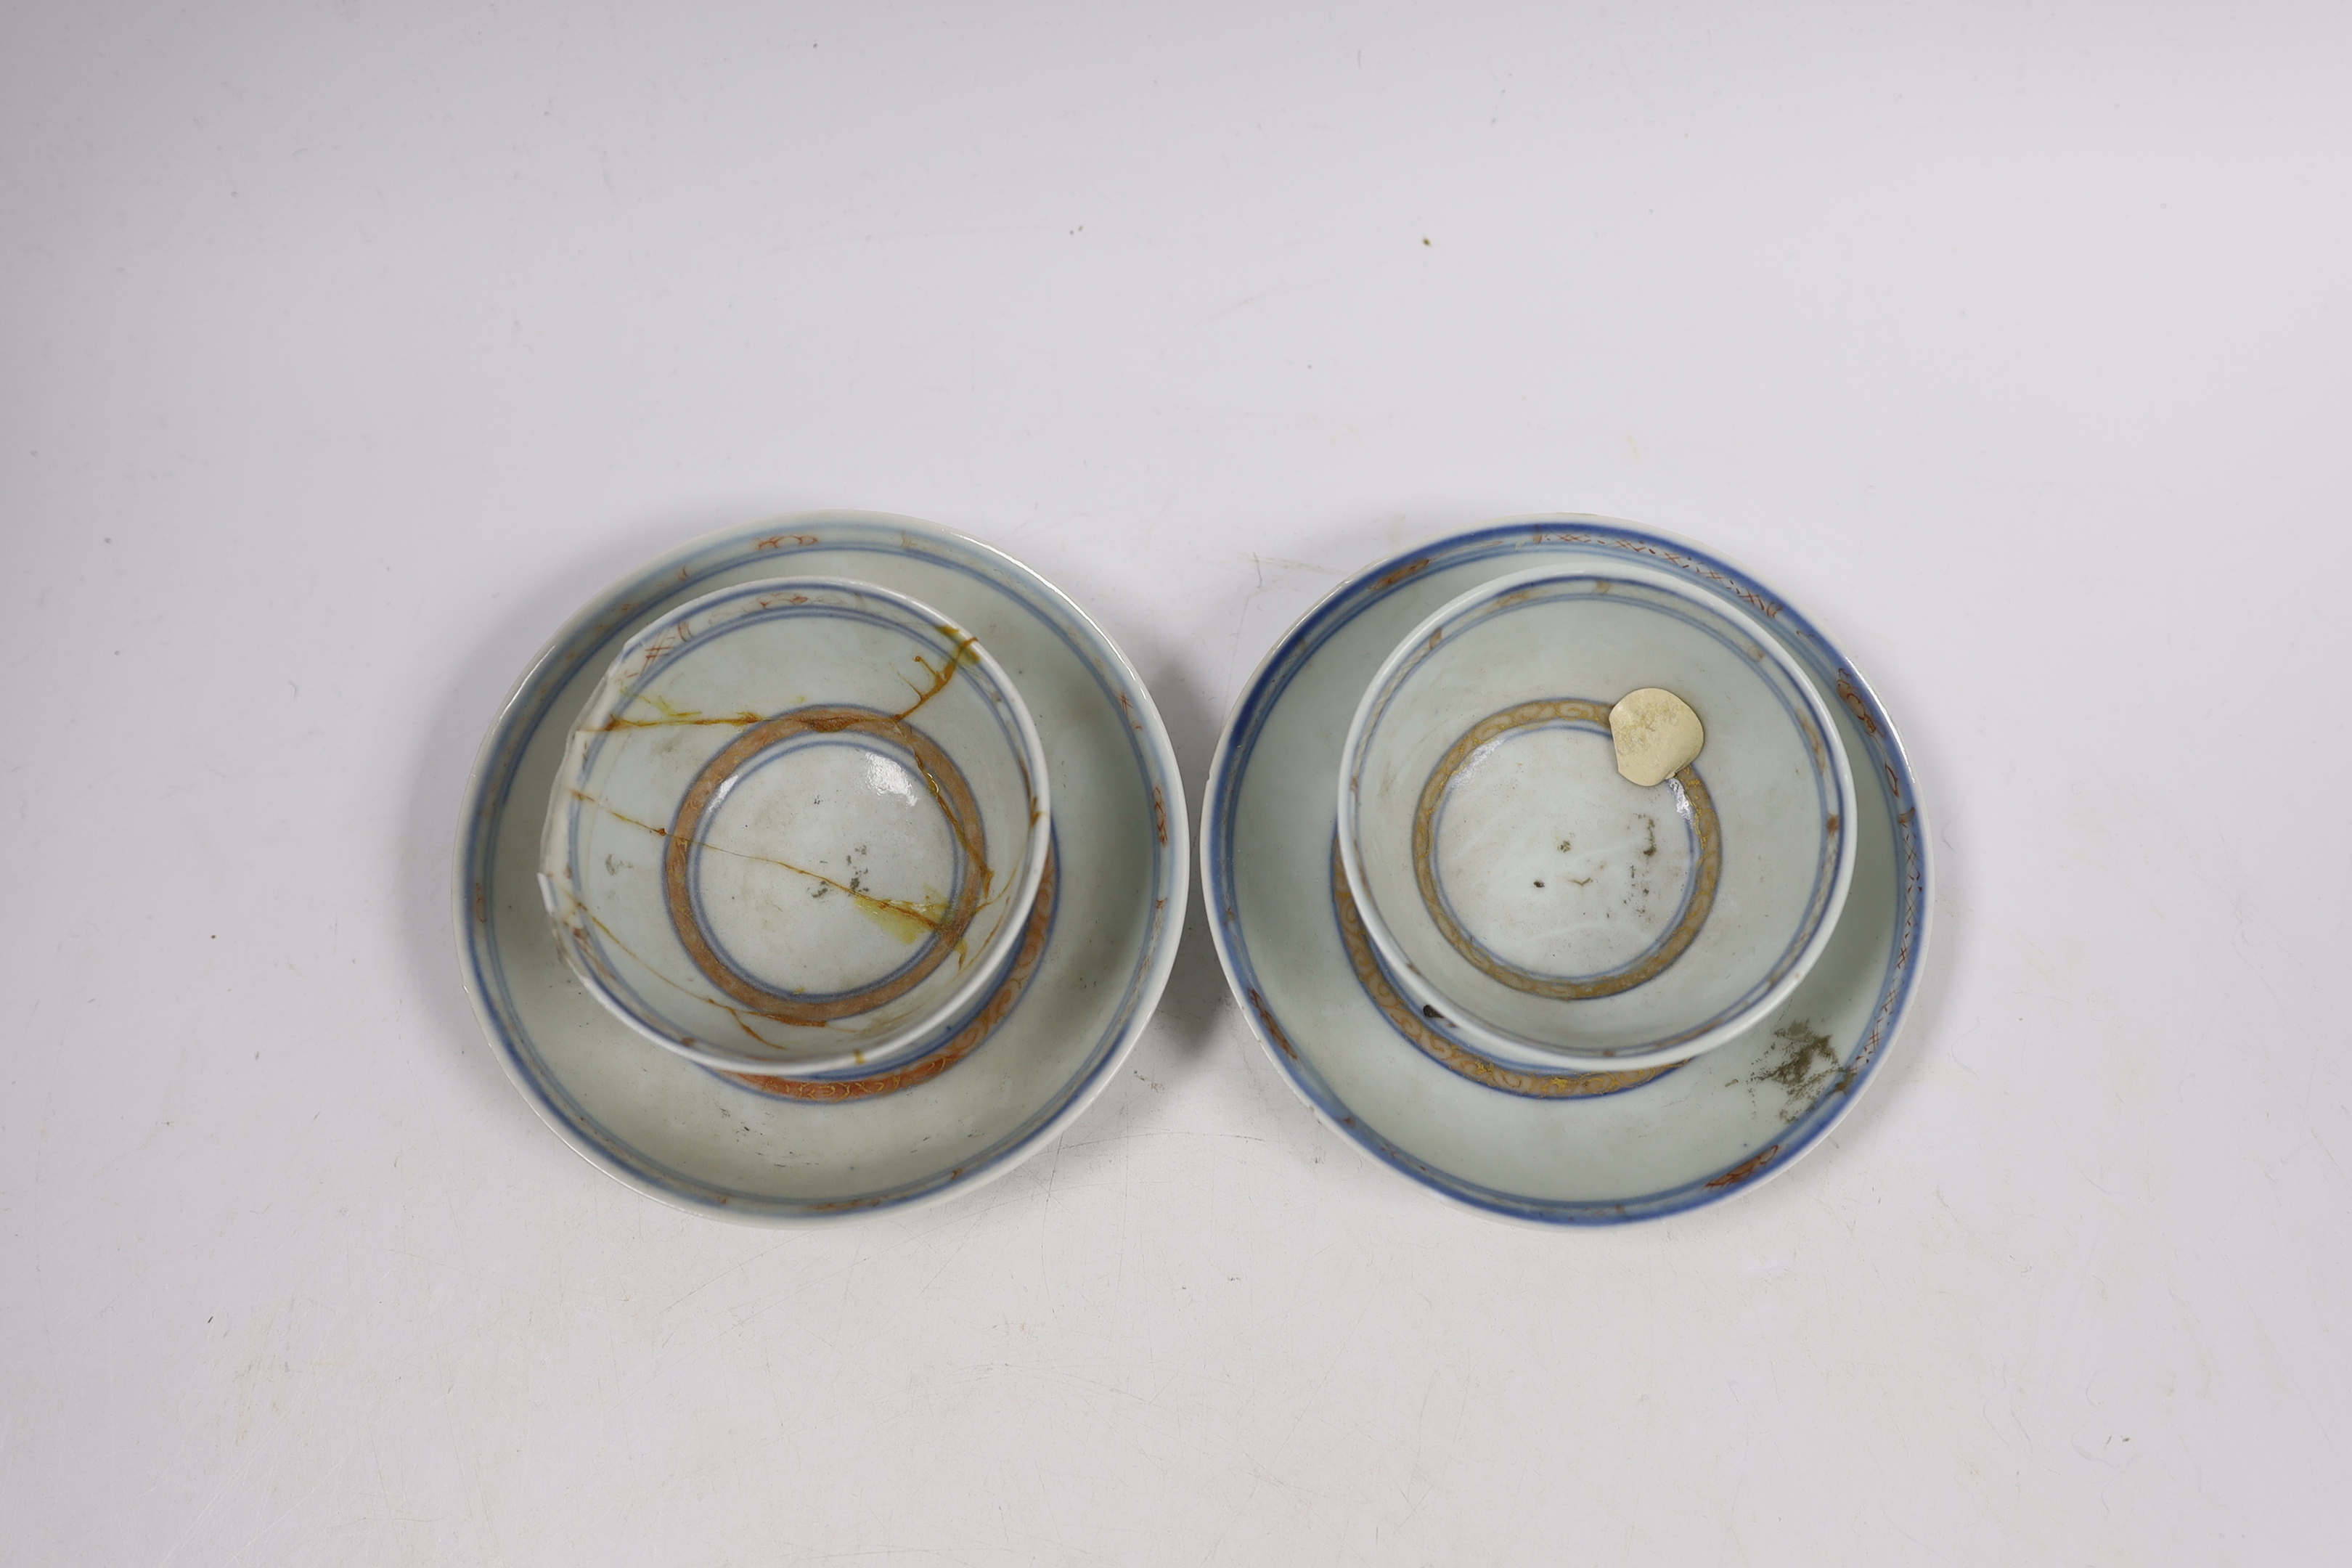 Two Chinese Nanking Cargo teabowls and saucers, Qianlong period